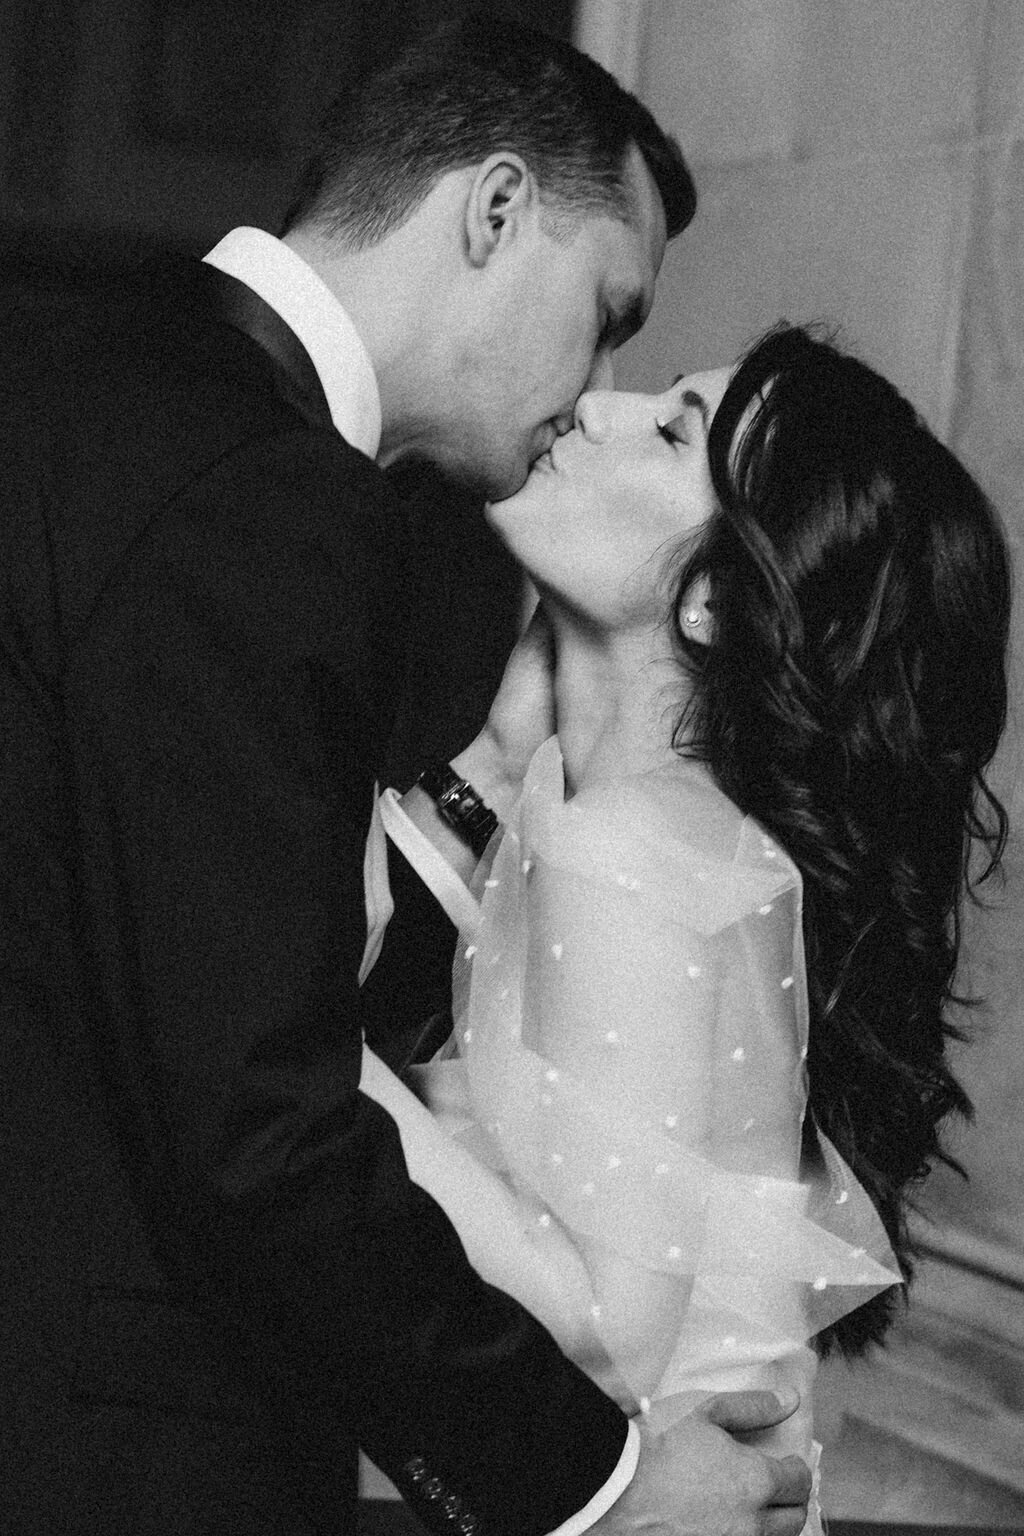 A monochrome image from a San Francisco City Hall photoshoot of a couple dressed in formal attire sharing a romantic kiss. The man is in a suit, and the woman in a dress with sheer polka-dot